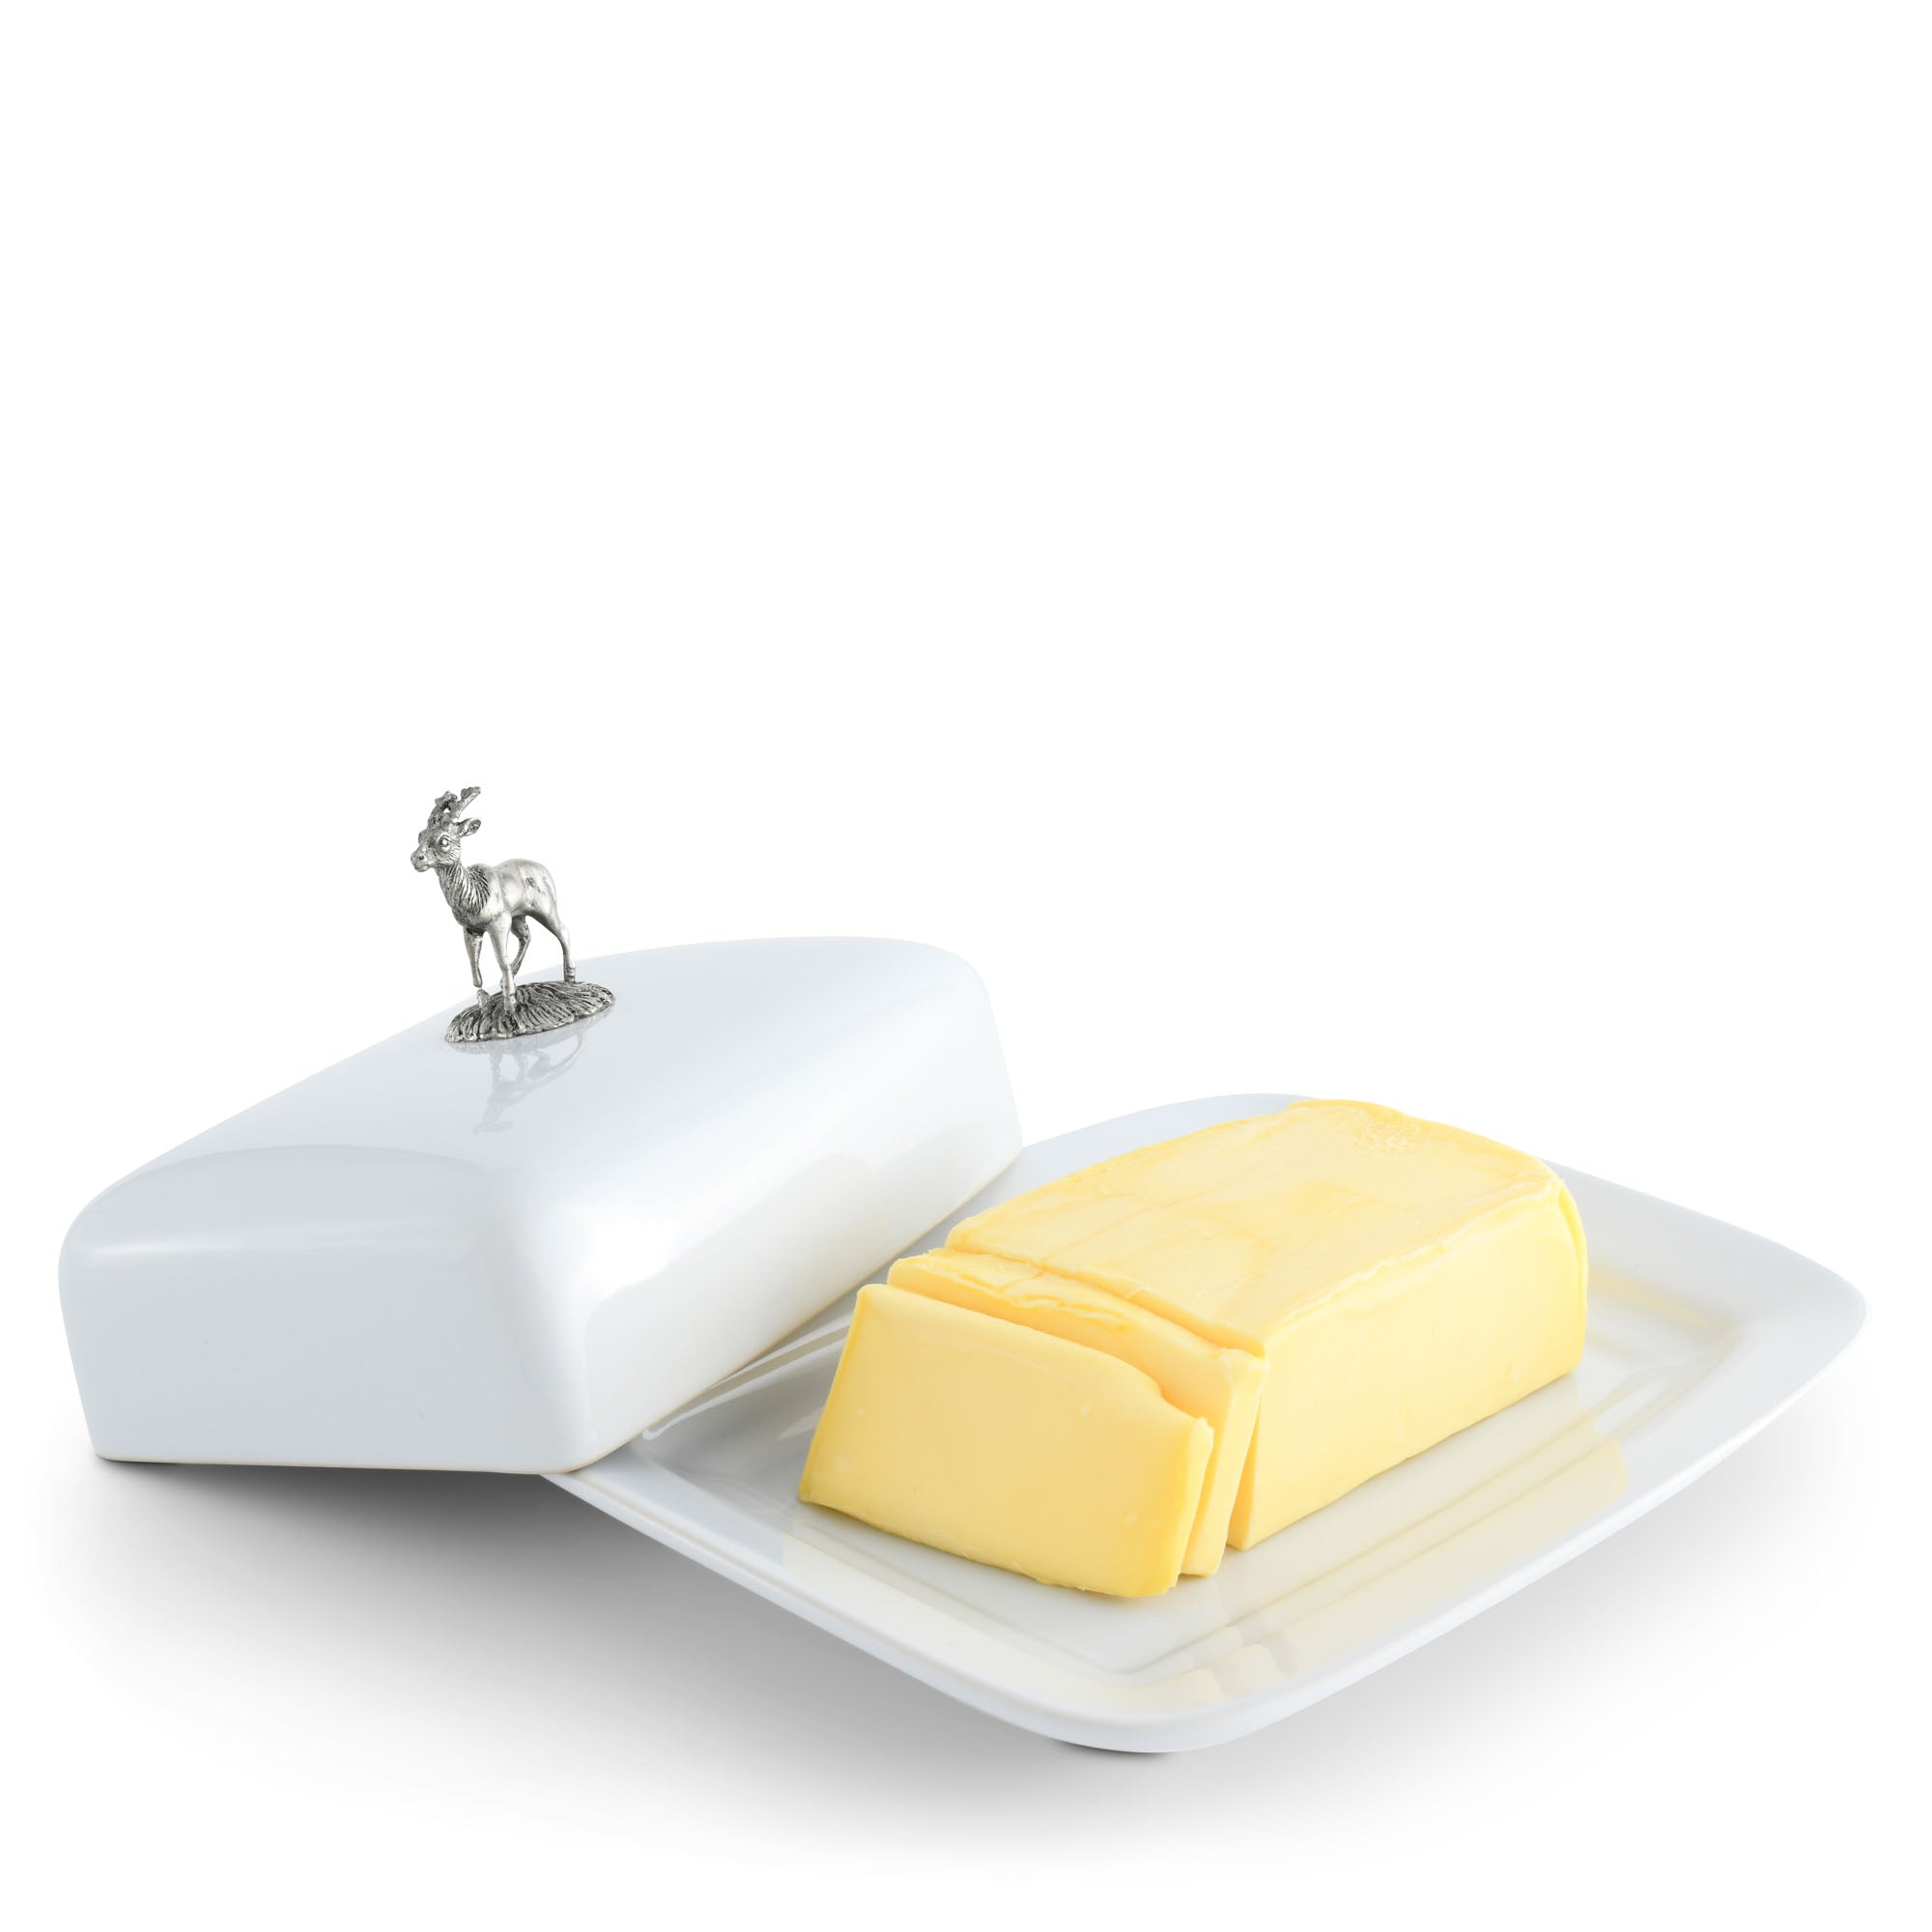 Vagabond House Stag Butter Dish Product Image